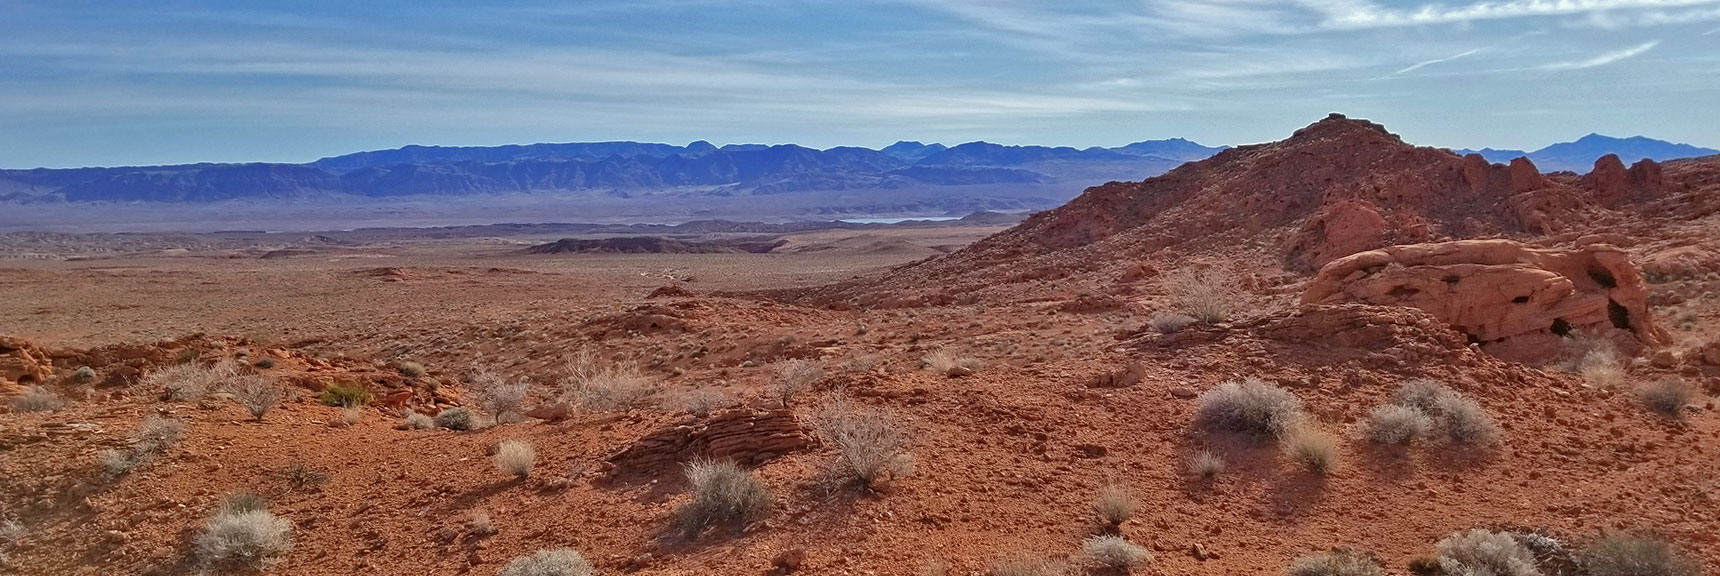 View Toward the Overton Arm of Lake Mead from the Red Rock Hills South of Elephant Loop in Valley of Fire State Park, Nevada